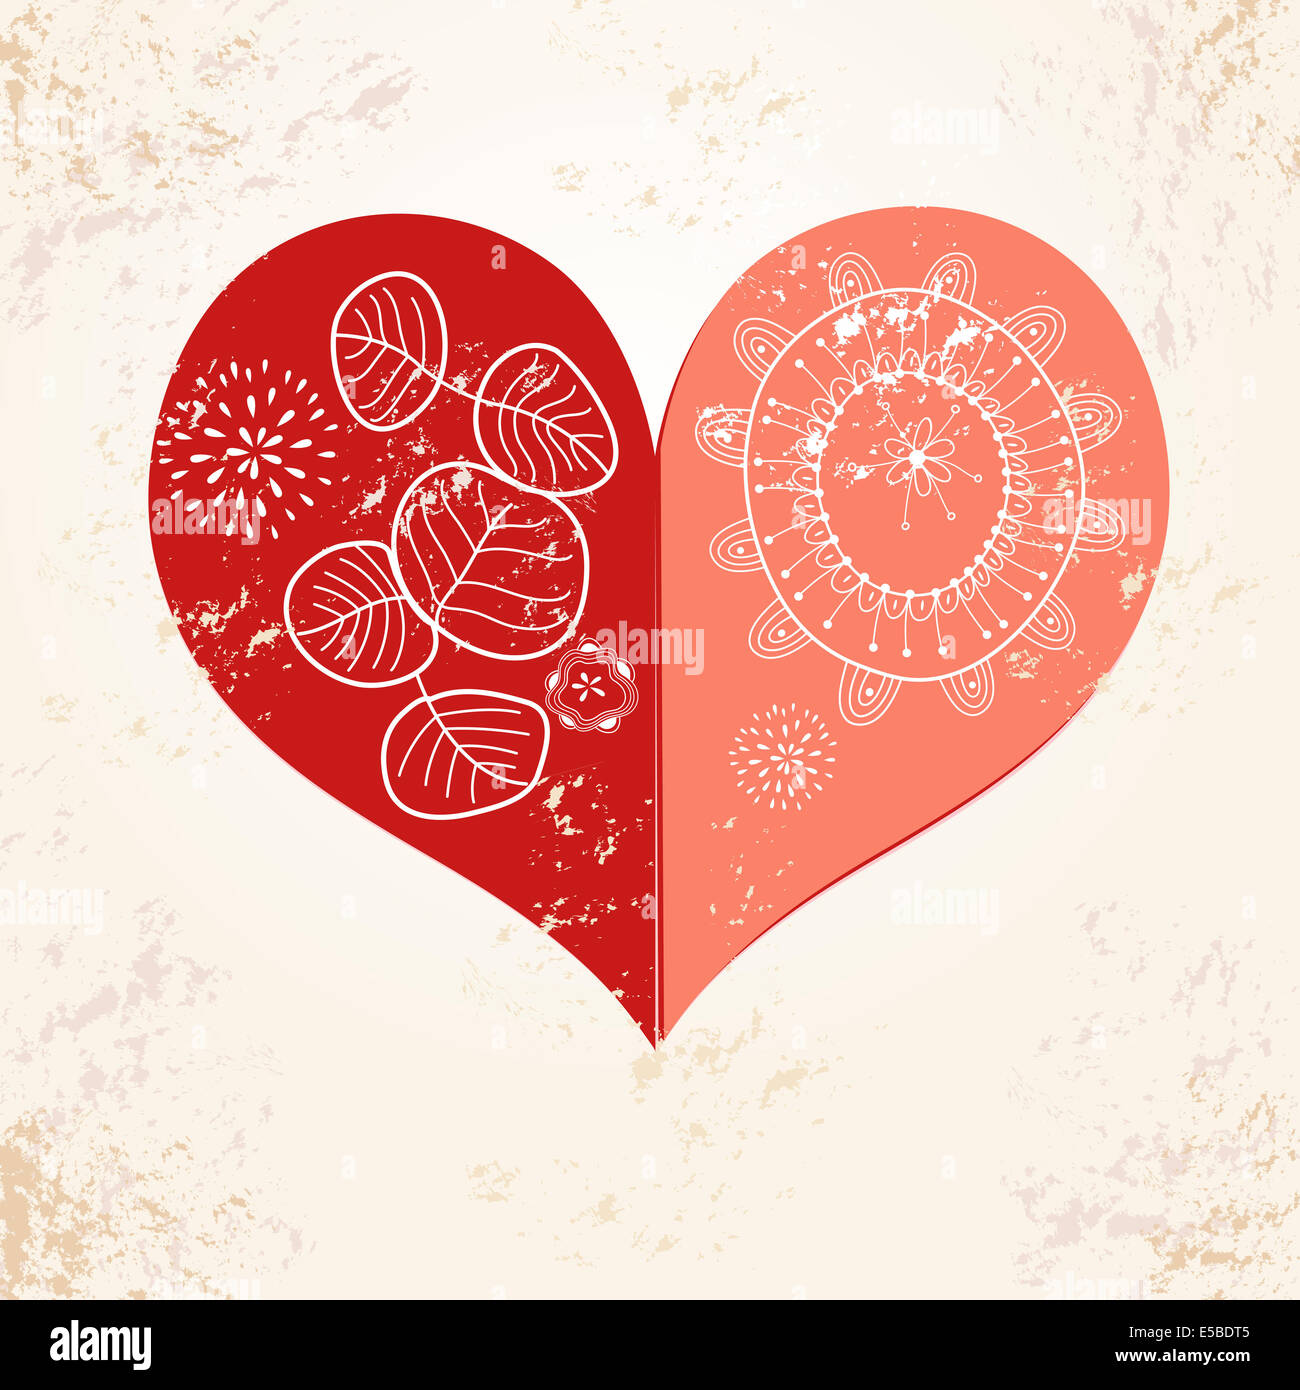 Decorative red heart on a textural background Stock Photo